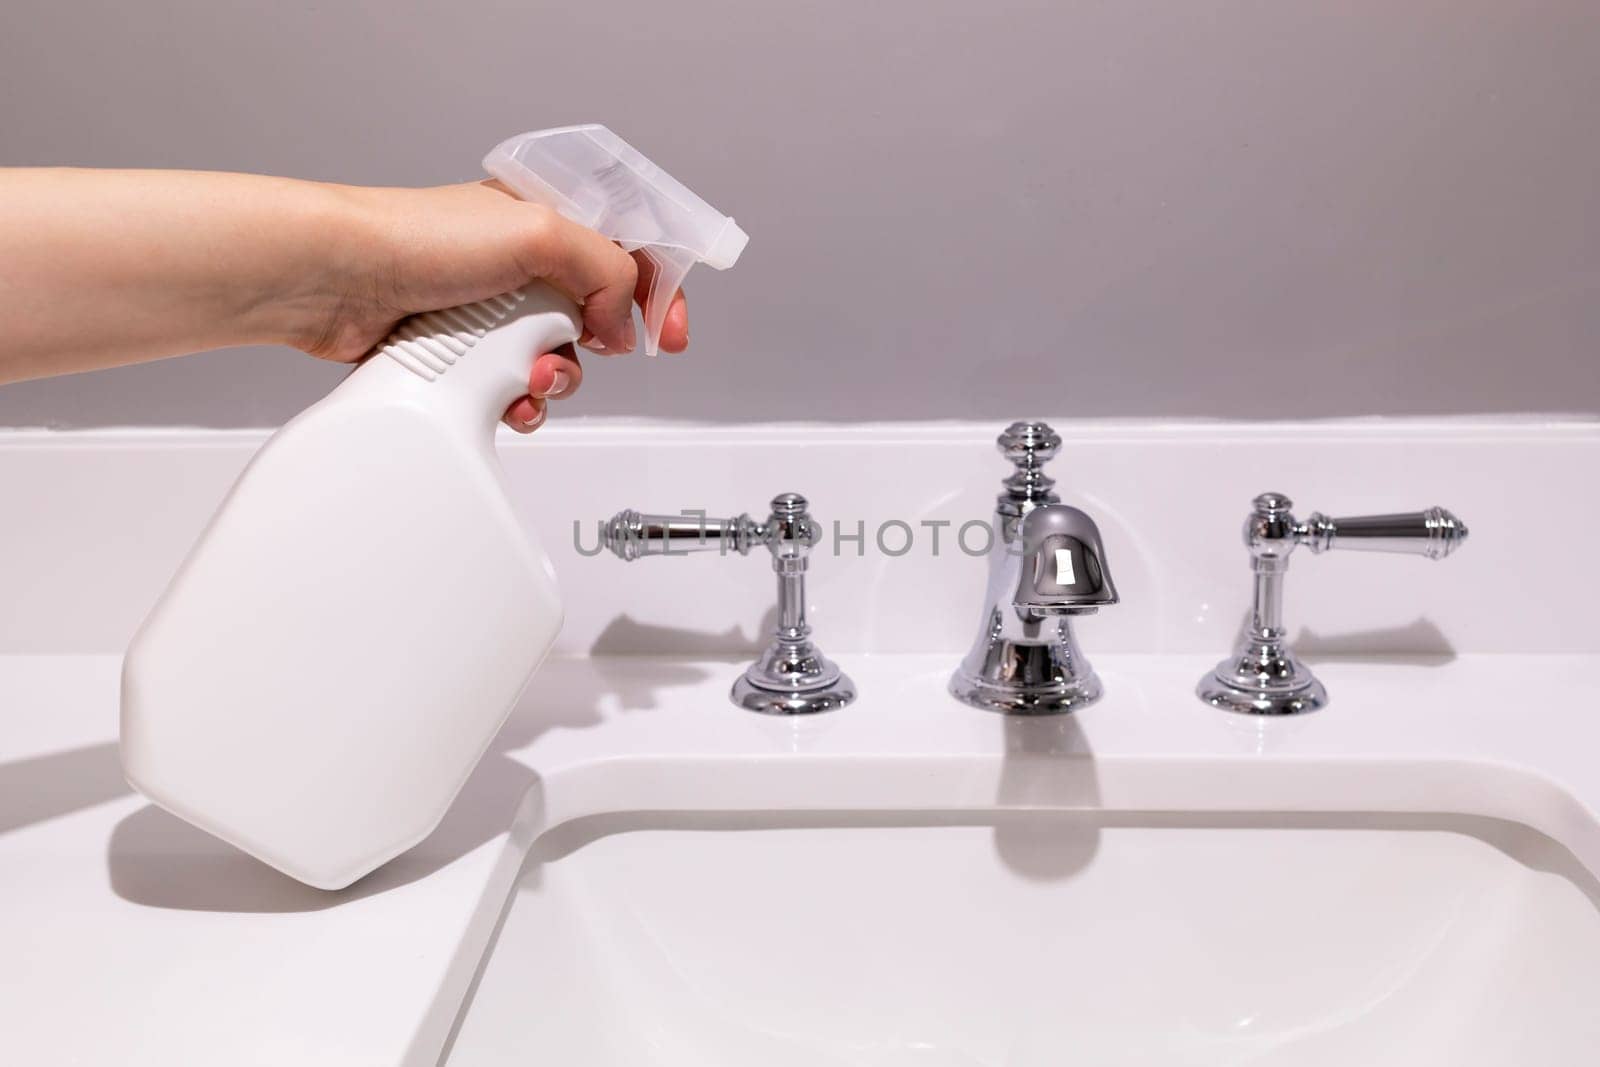 White Blank Plastic Spray Bottle In Female Hands On White Sink In Bathroom. Packaging Mockup. Blank Spray Bottle for Cleaning, Sanitary. Lifestyle. Empty Place For Text Or Logo Horizontal Plane. by netatsi